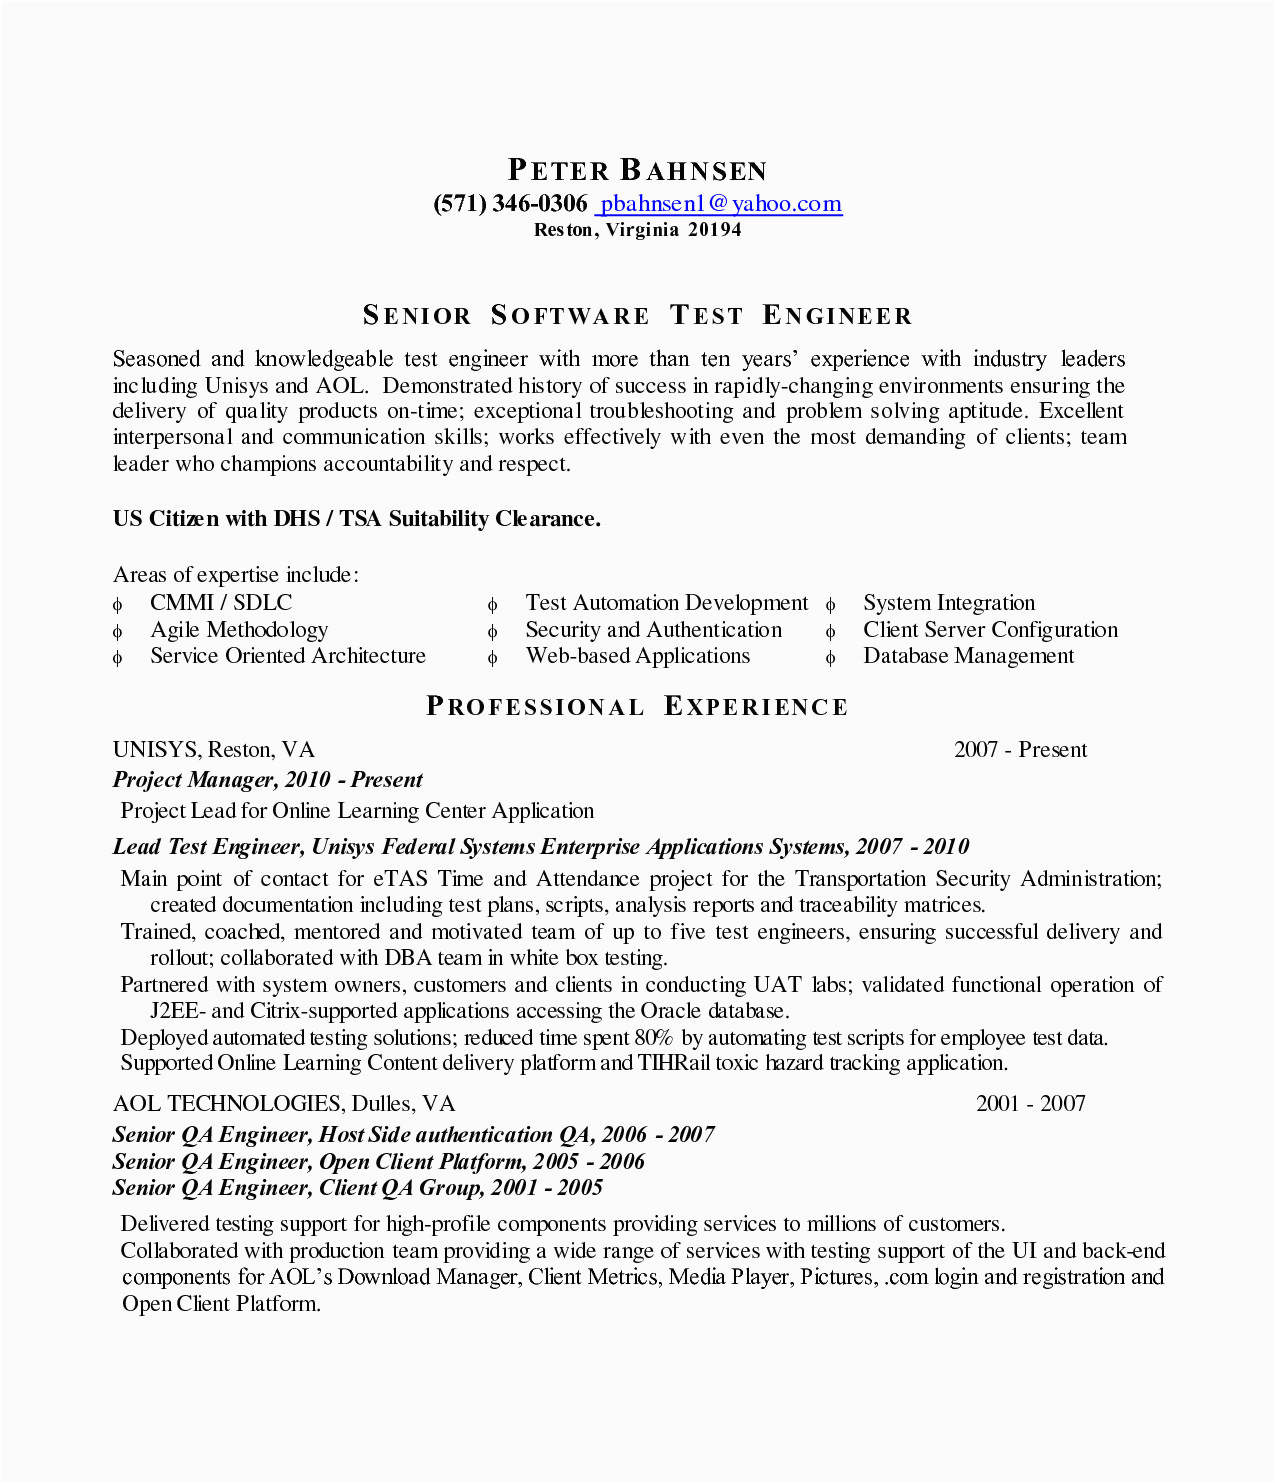 Sample Resume for Experienced software Test Engineer Sample Resume for software Test Engineer with Experience